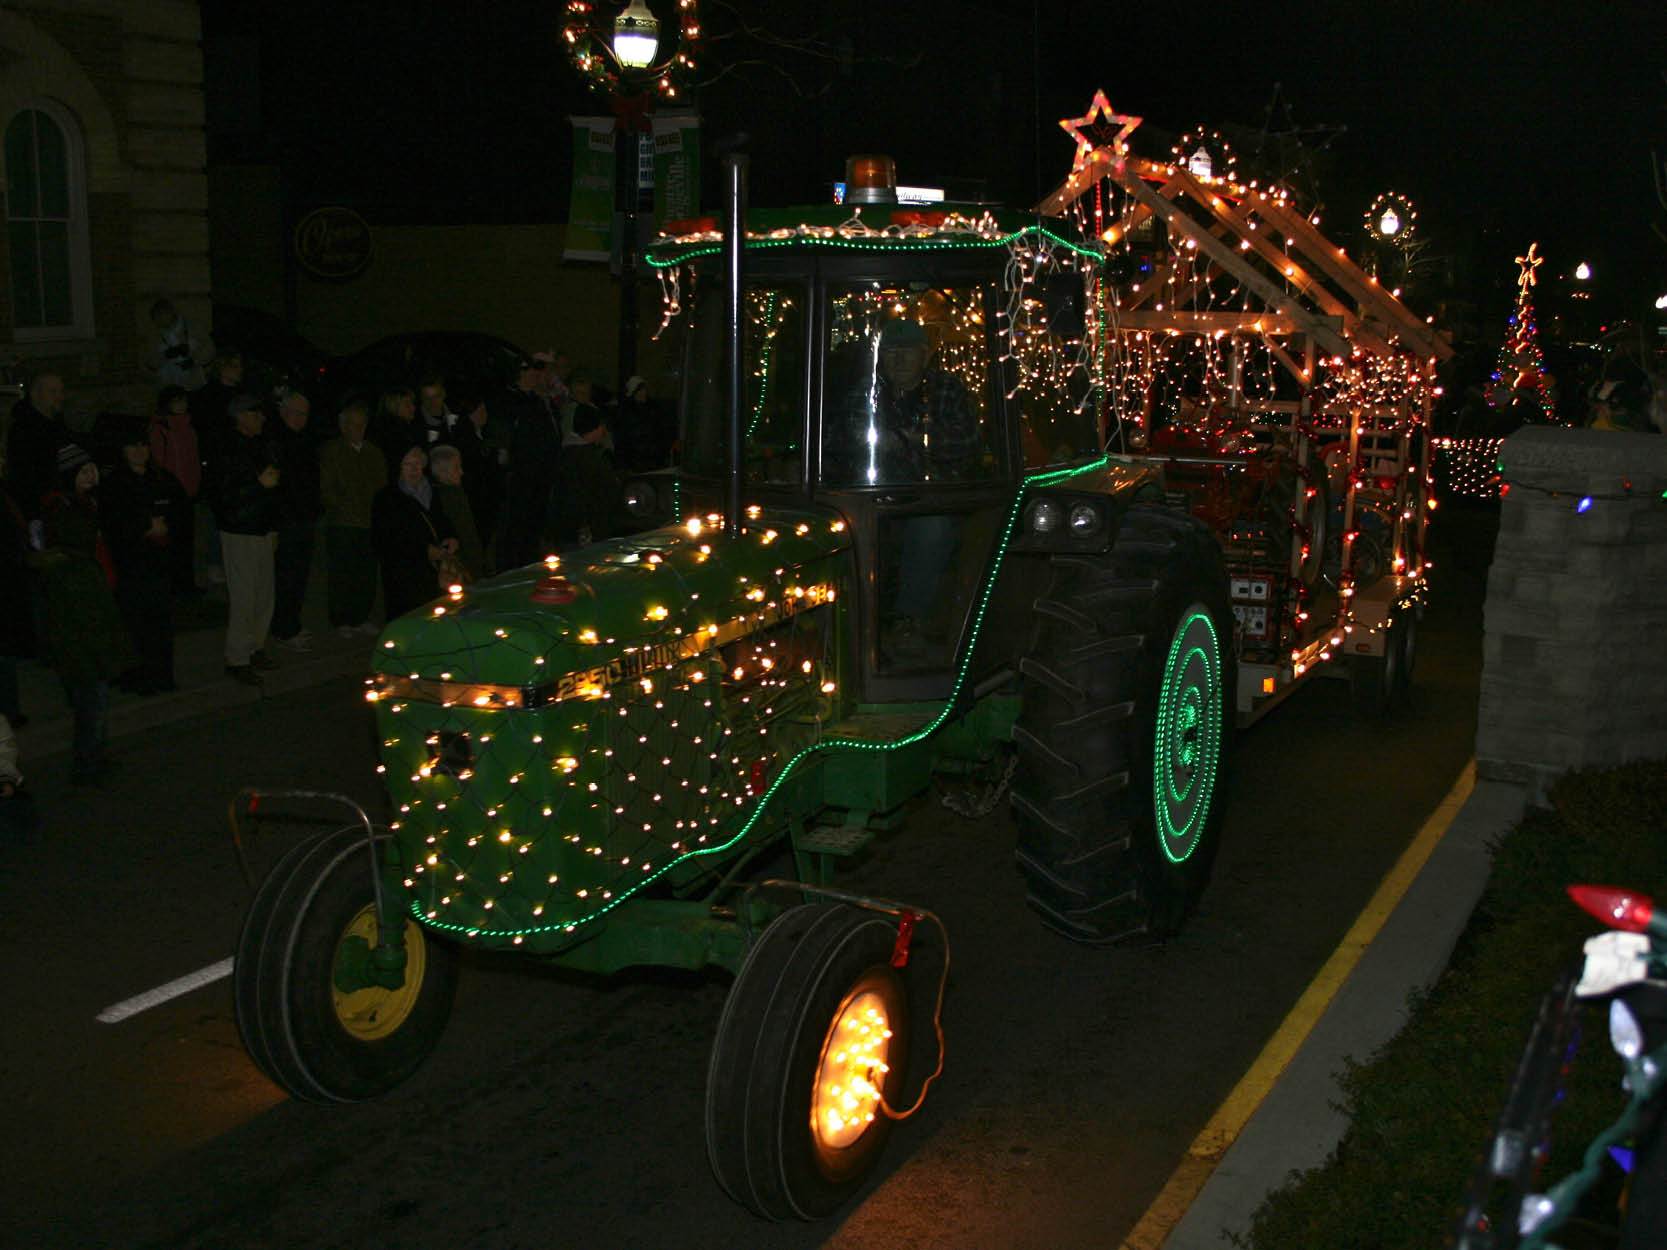 Tractor decorated in lights at night